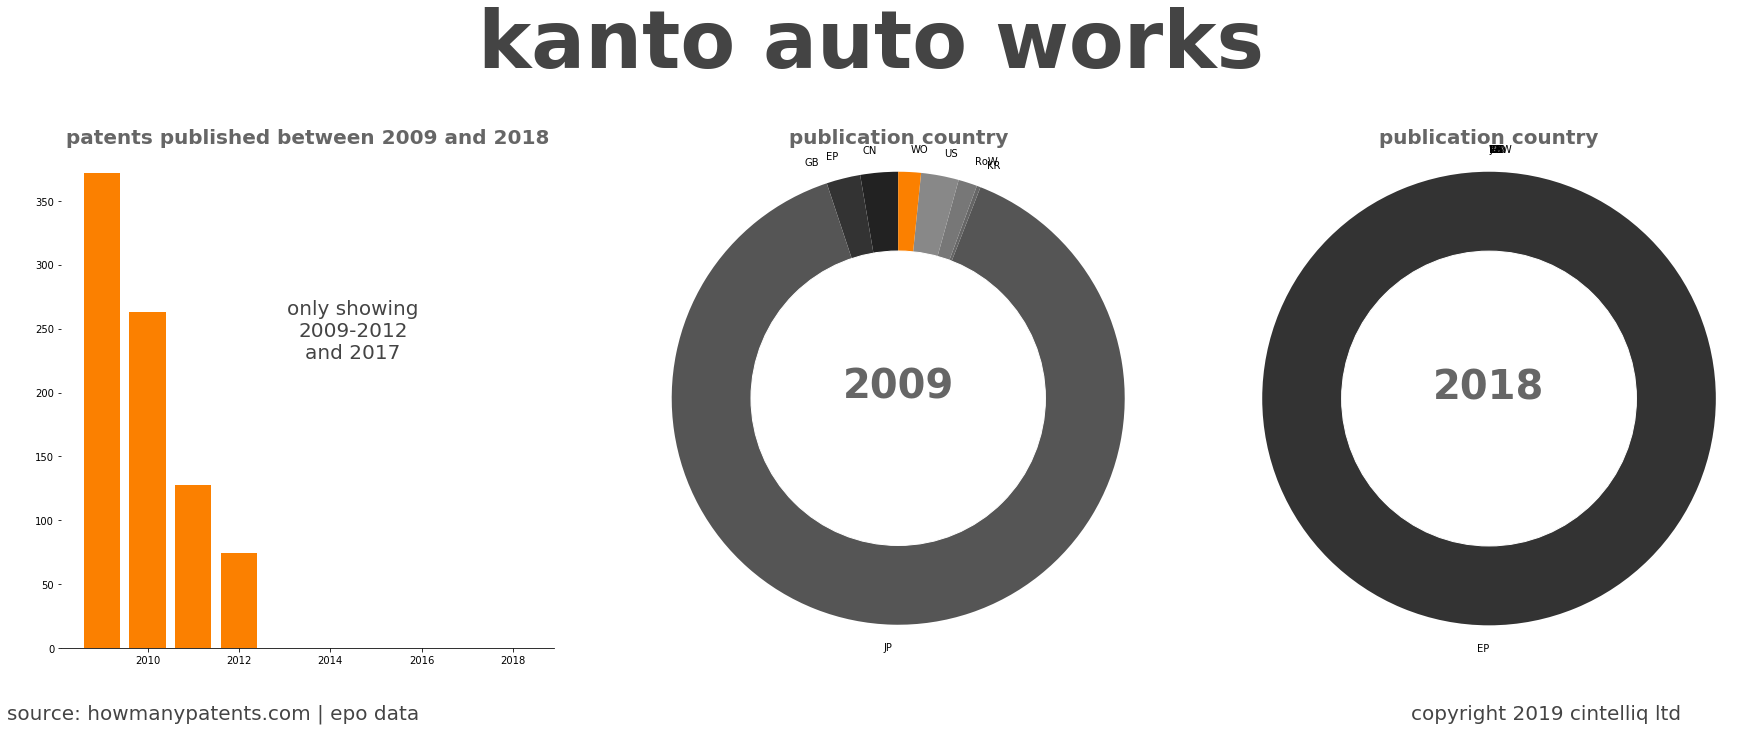 summary of patents for Kanto Auto Works